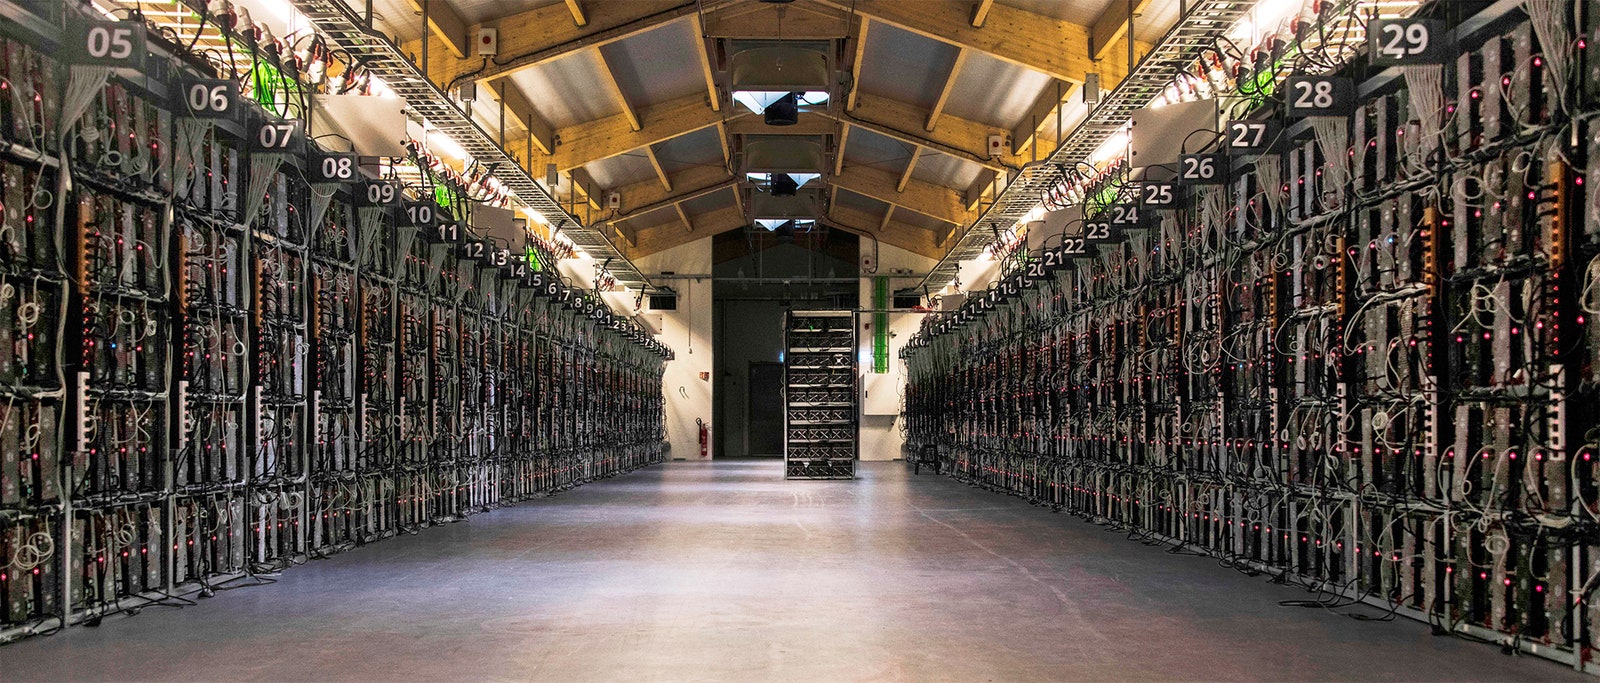  A bitcoin mining farm in Iceland. KOLBEINS/AFP/GETTY IMAGES.